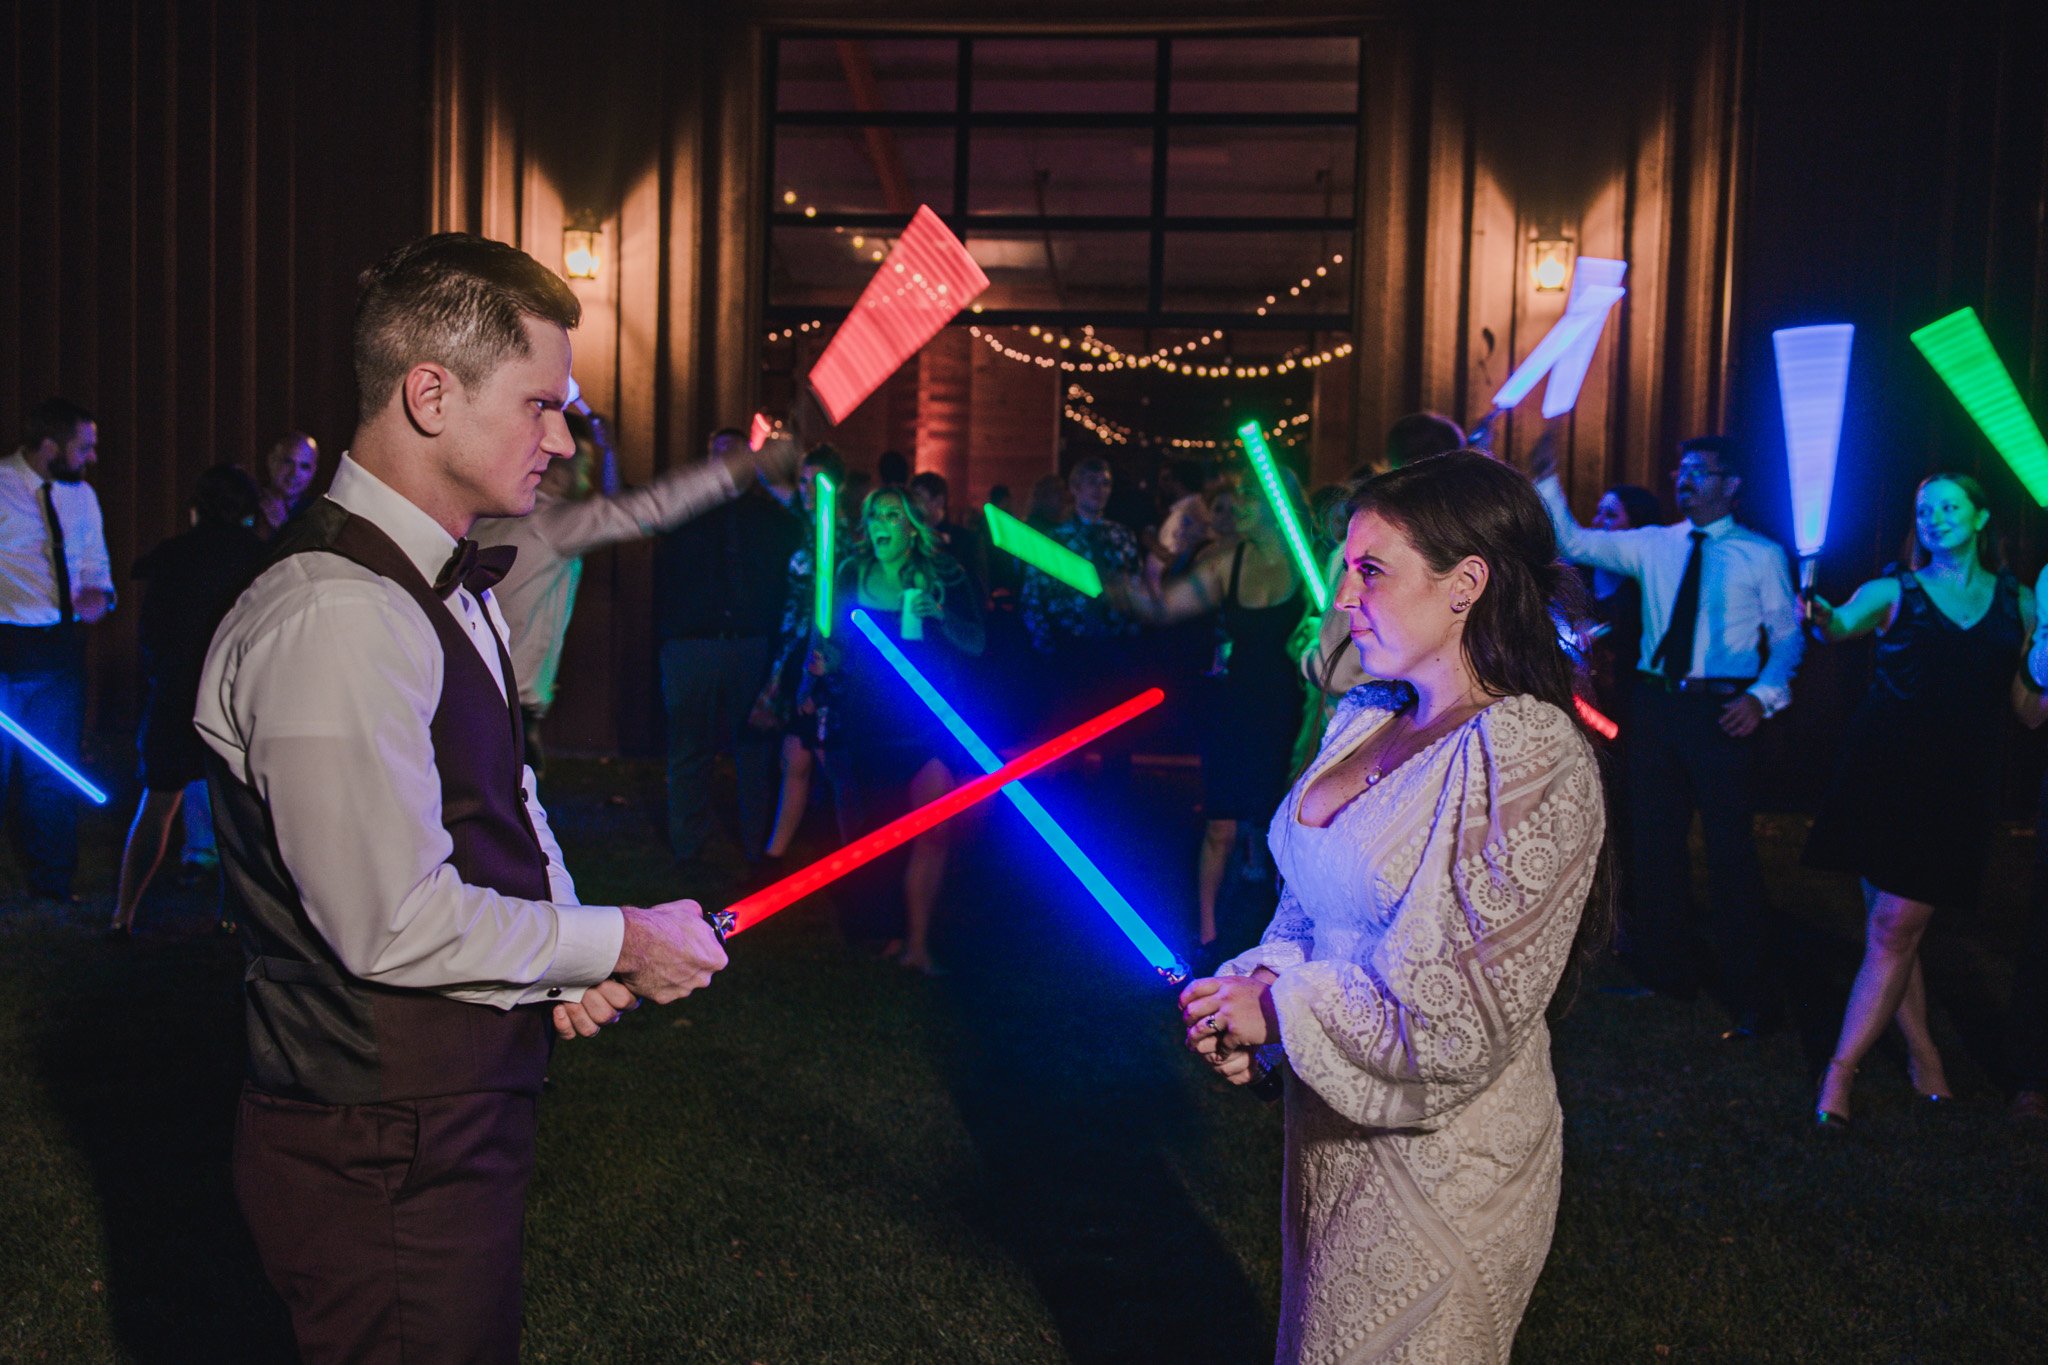 A bride and groom with light sabers, making a fierce face.